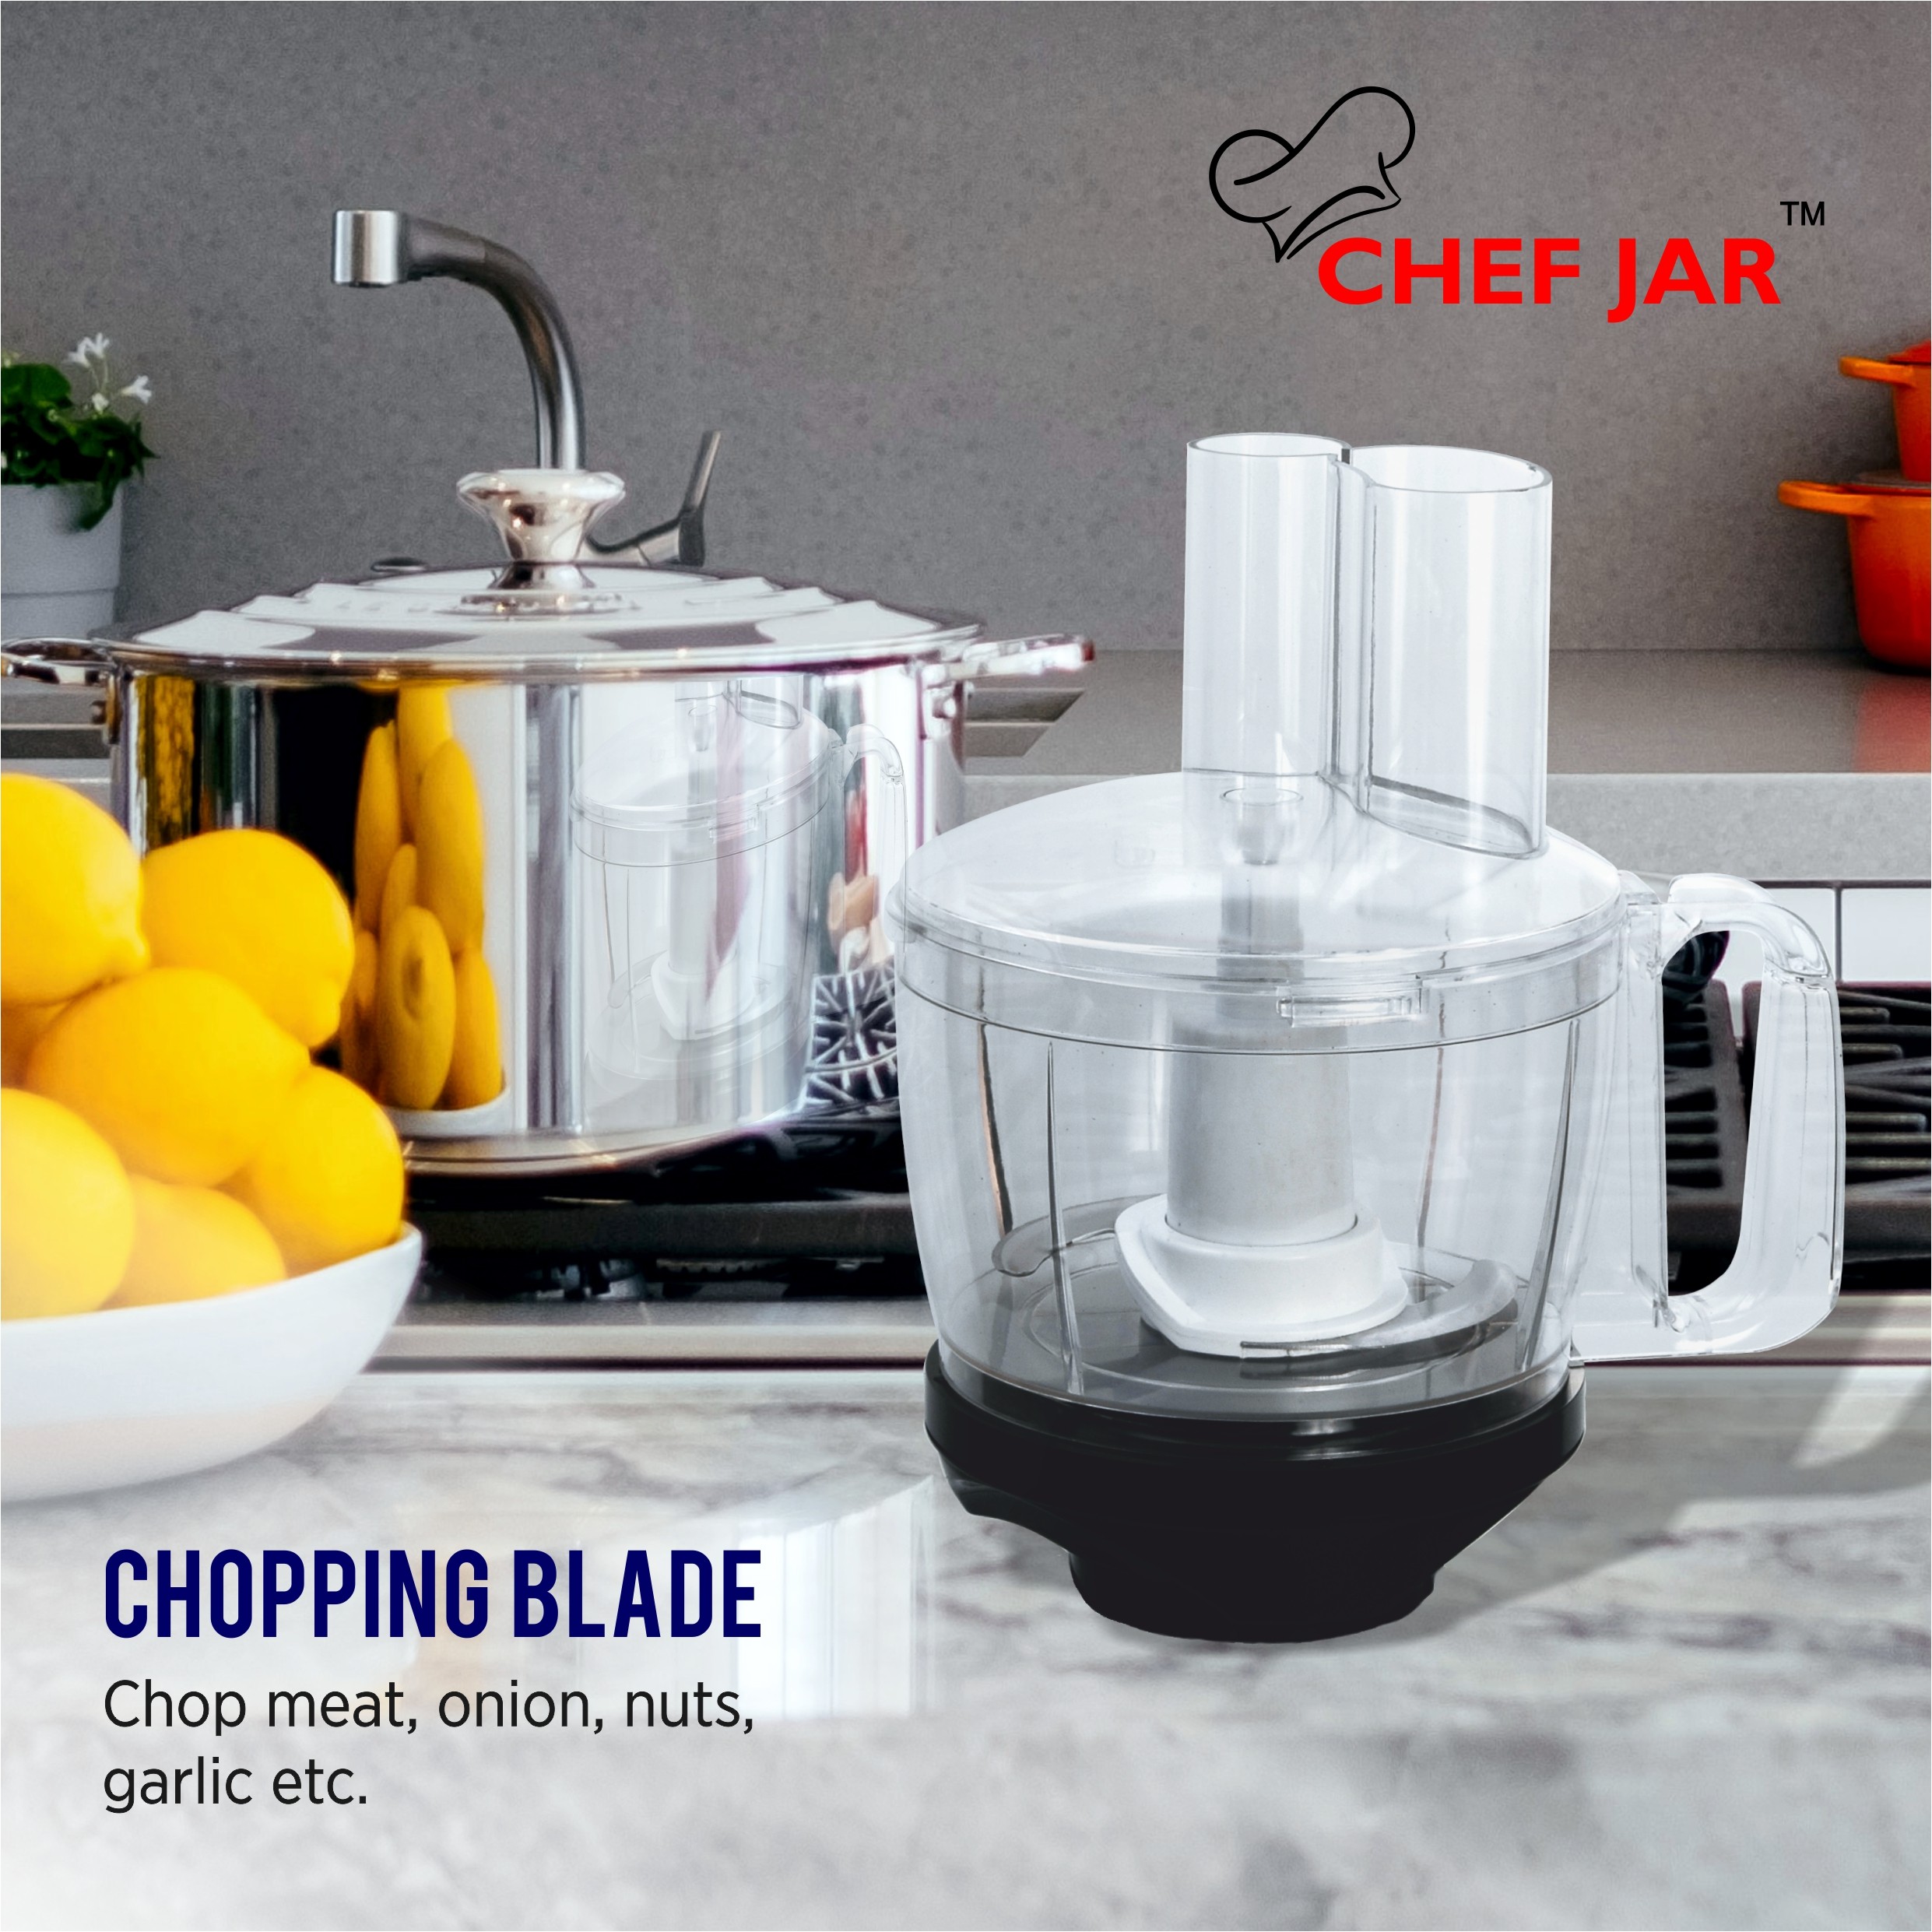 chef-jar-all-in-one-a-complete-food-processor-attachment-for-most-indian-mixer-grinders2